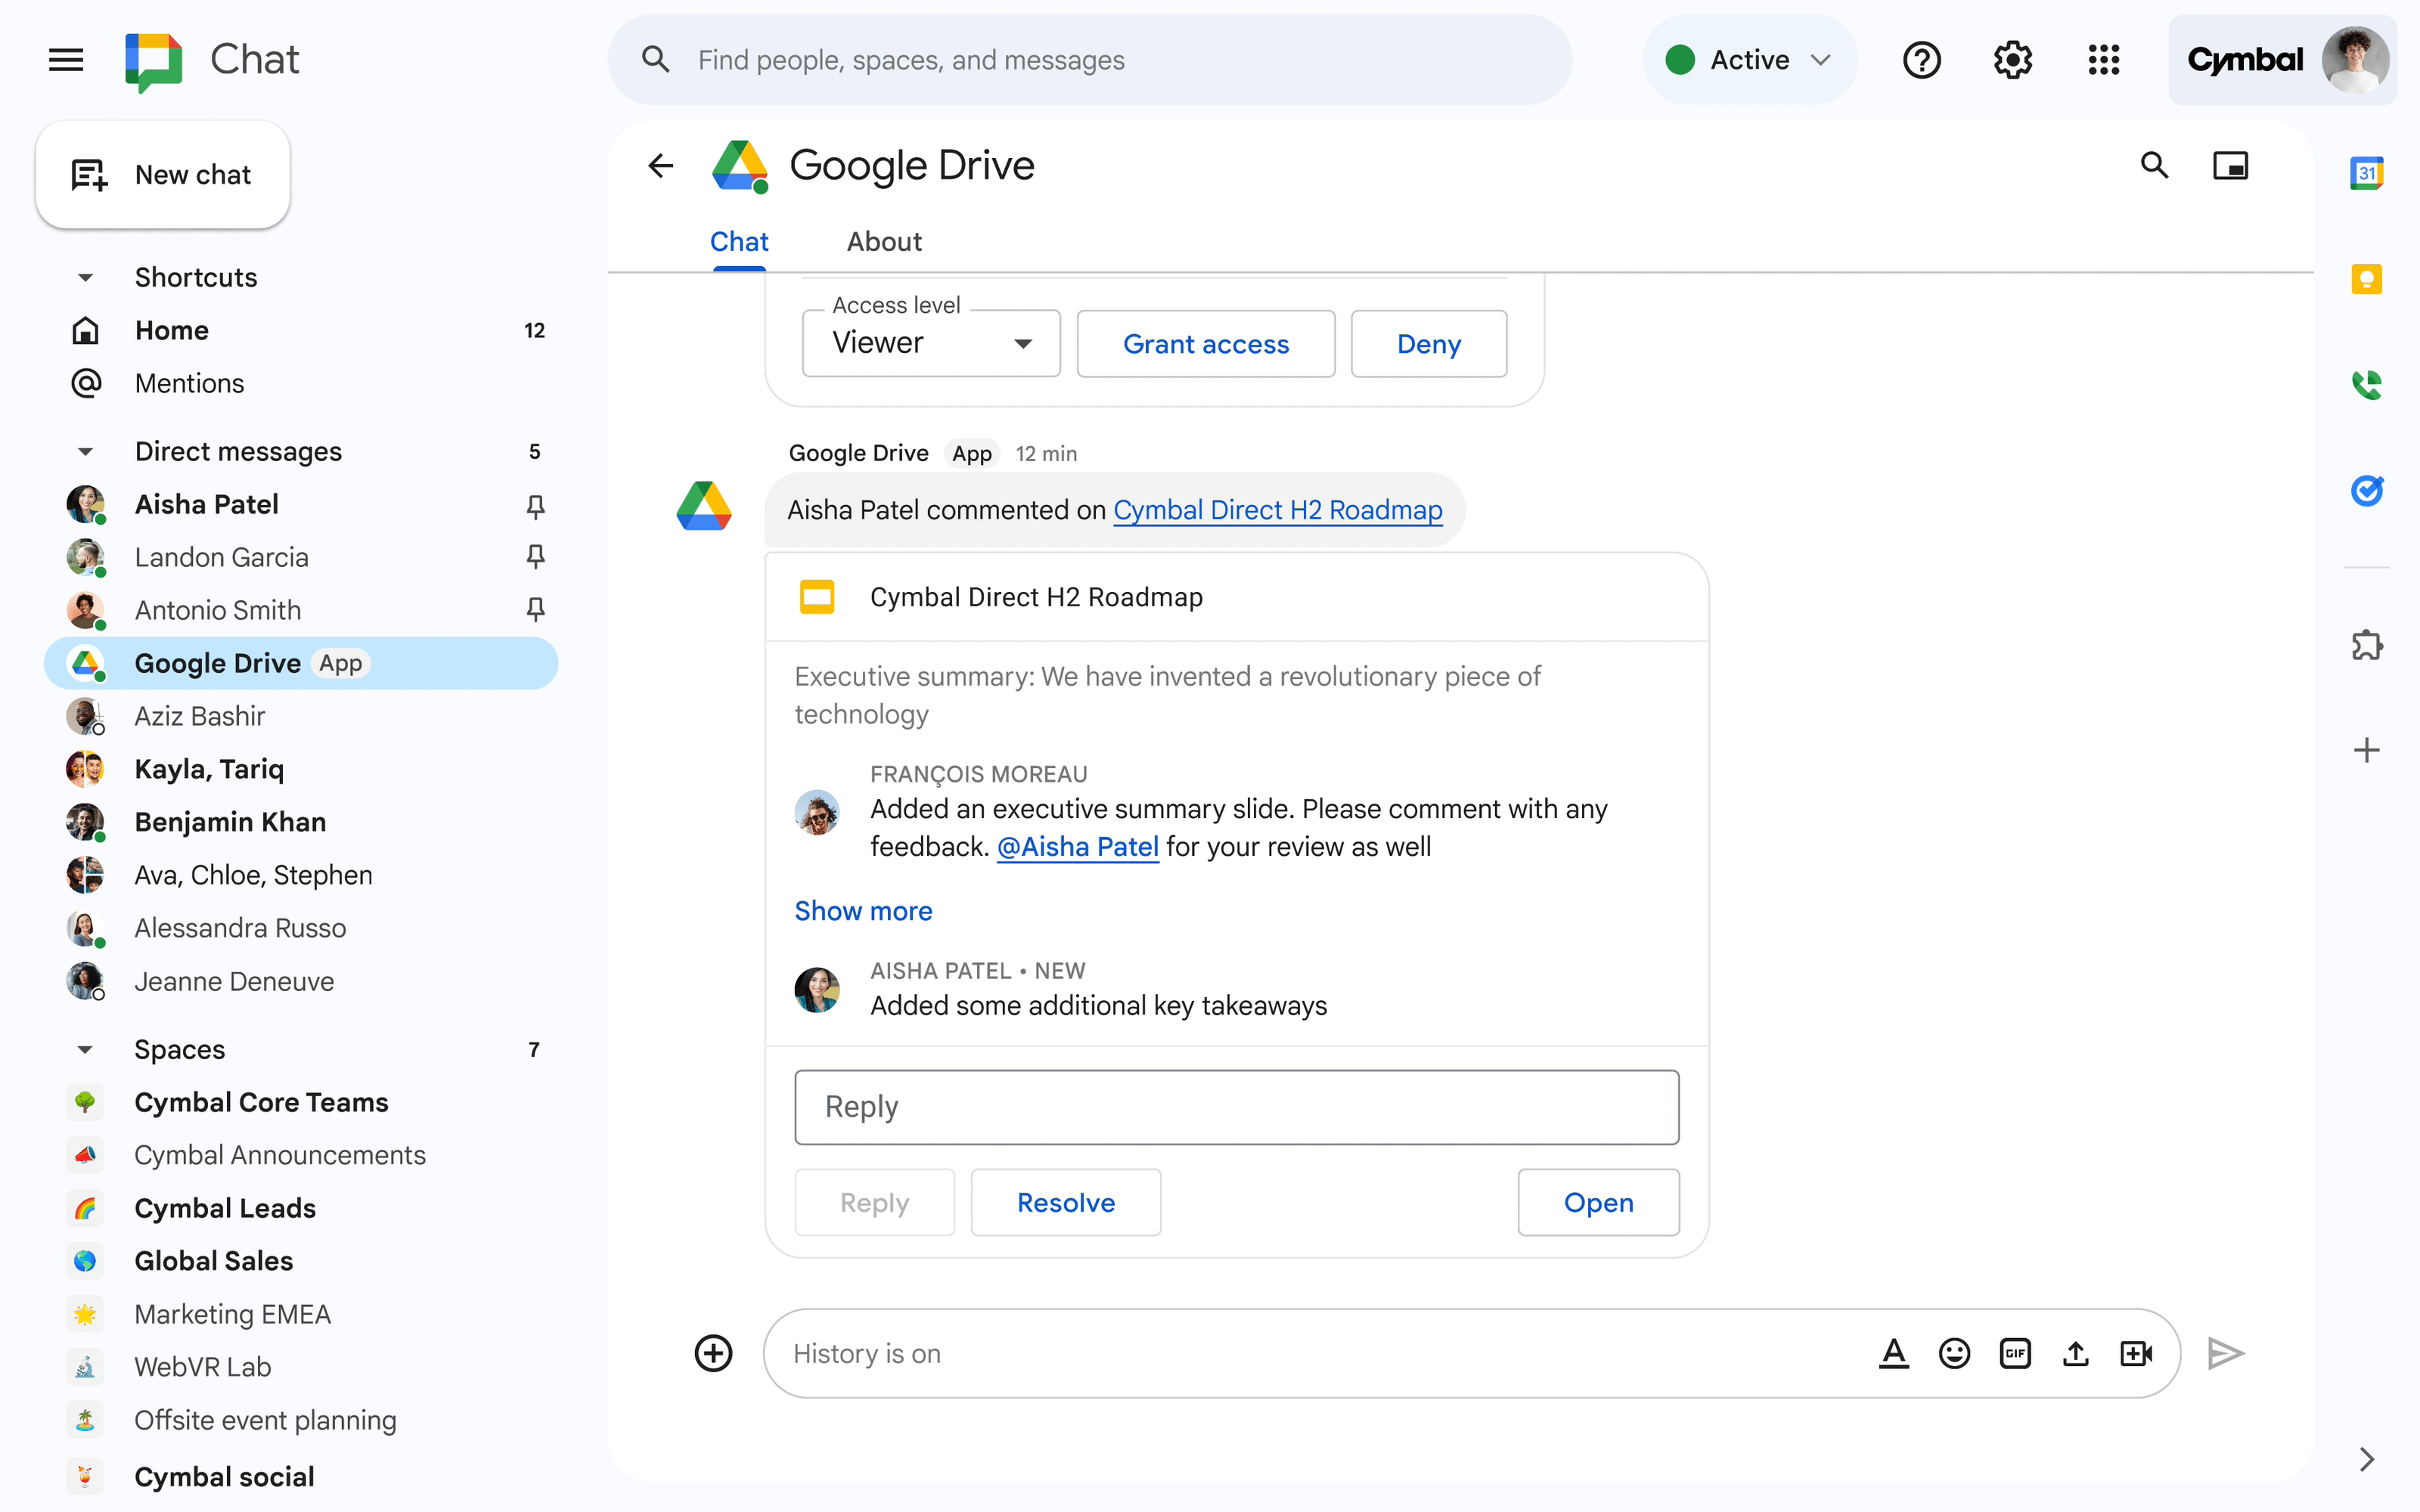 Take action on Google Drive requests and comments directly in Google Chat